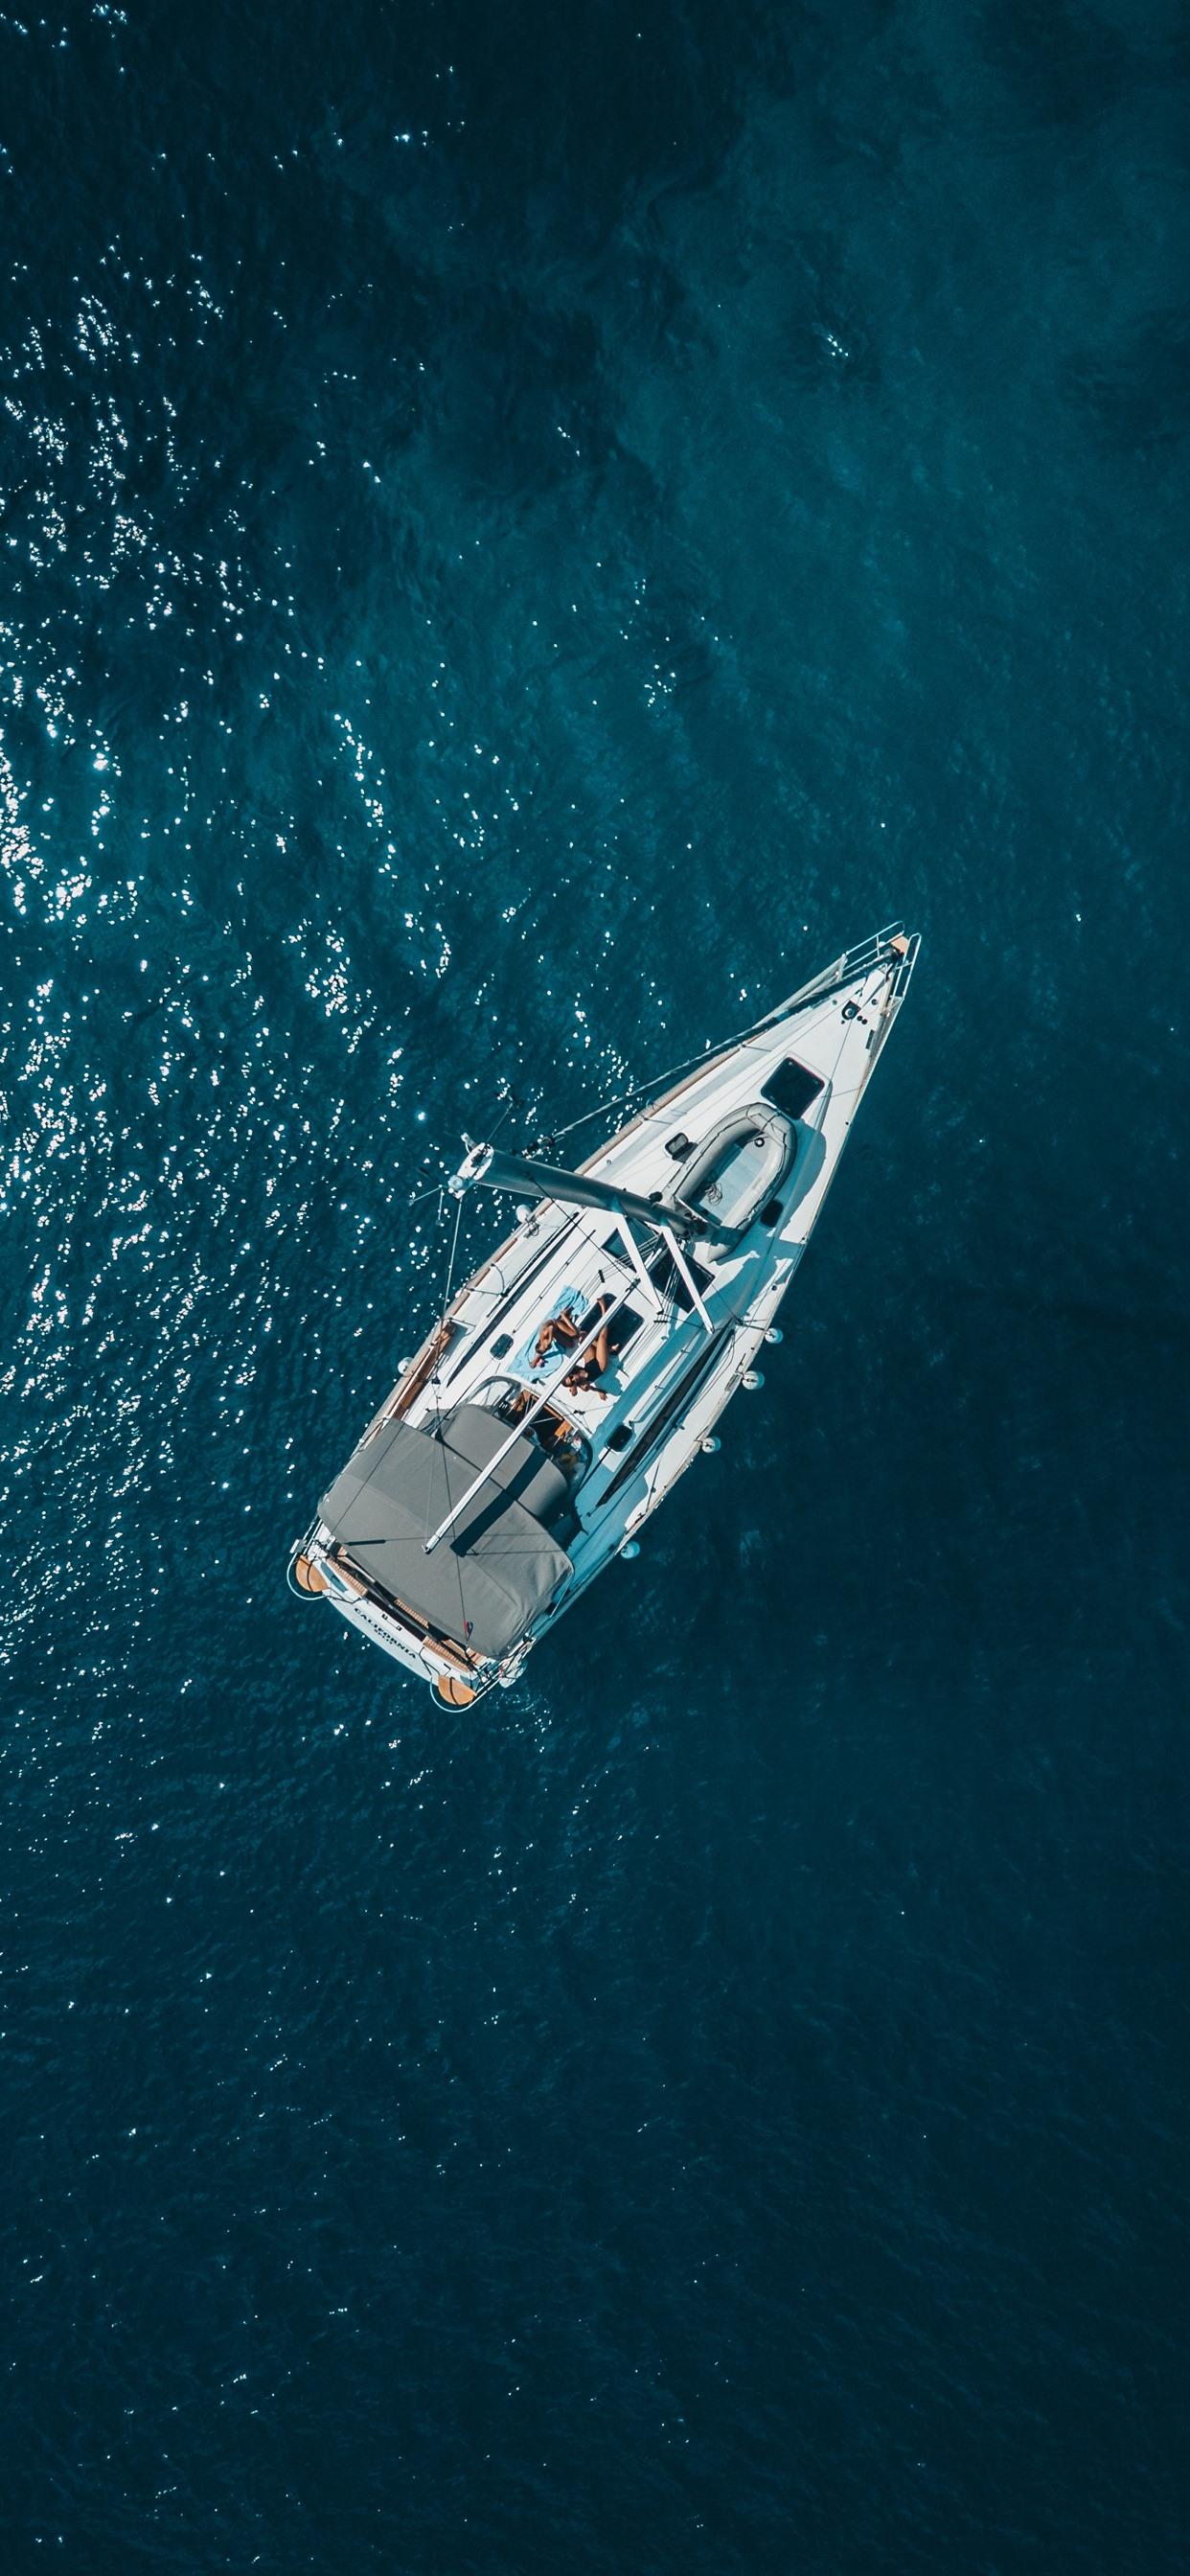 Boat, sea, top view 1242x2688 iPhone XS Max wallpaper, background